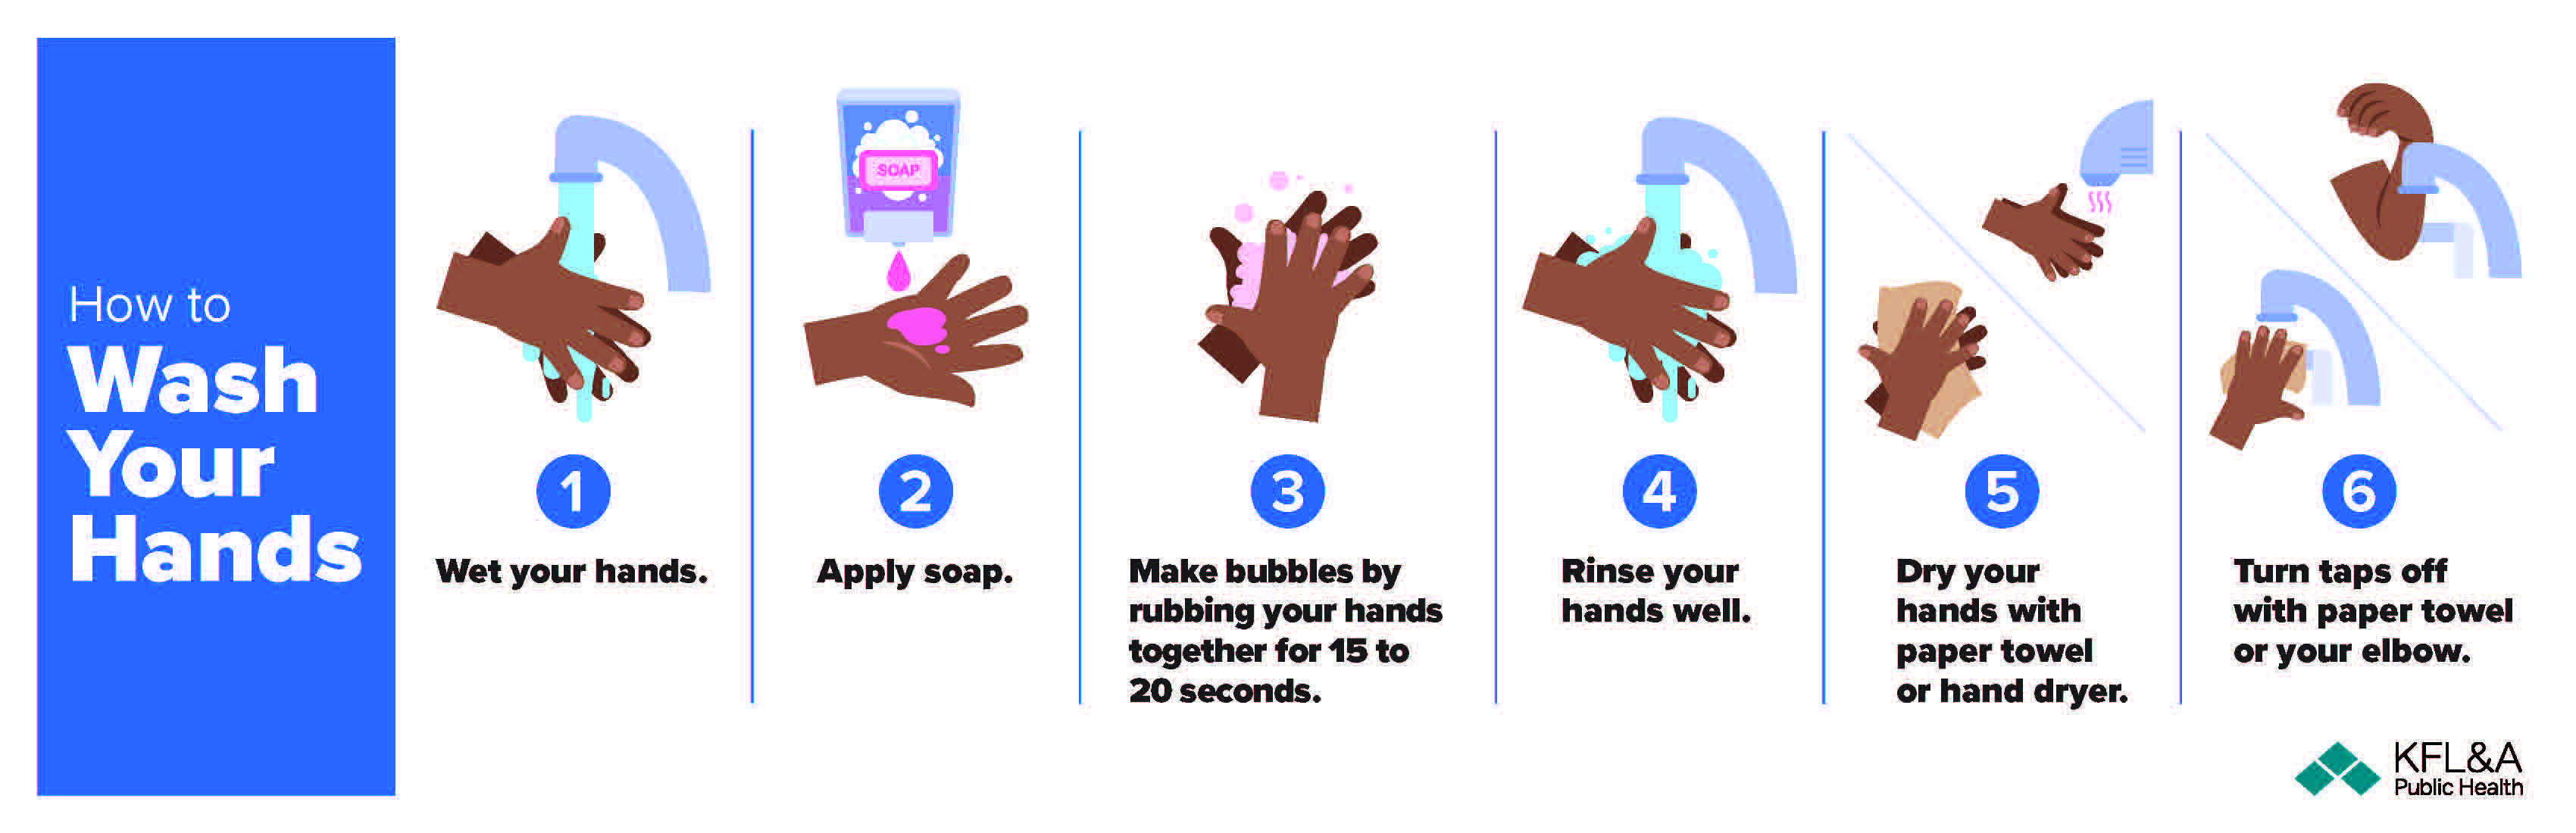 Step by step images of how to wash your hands